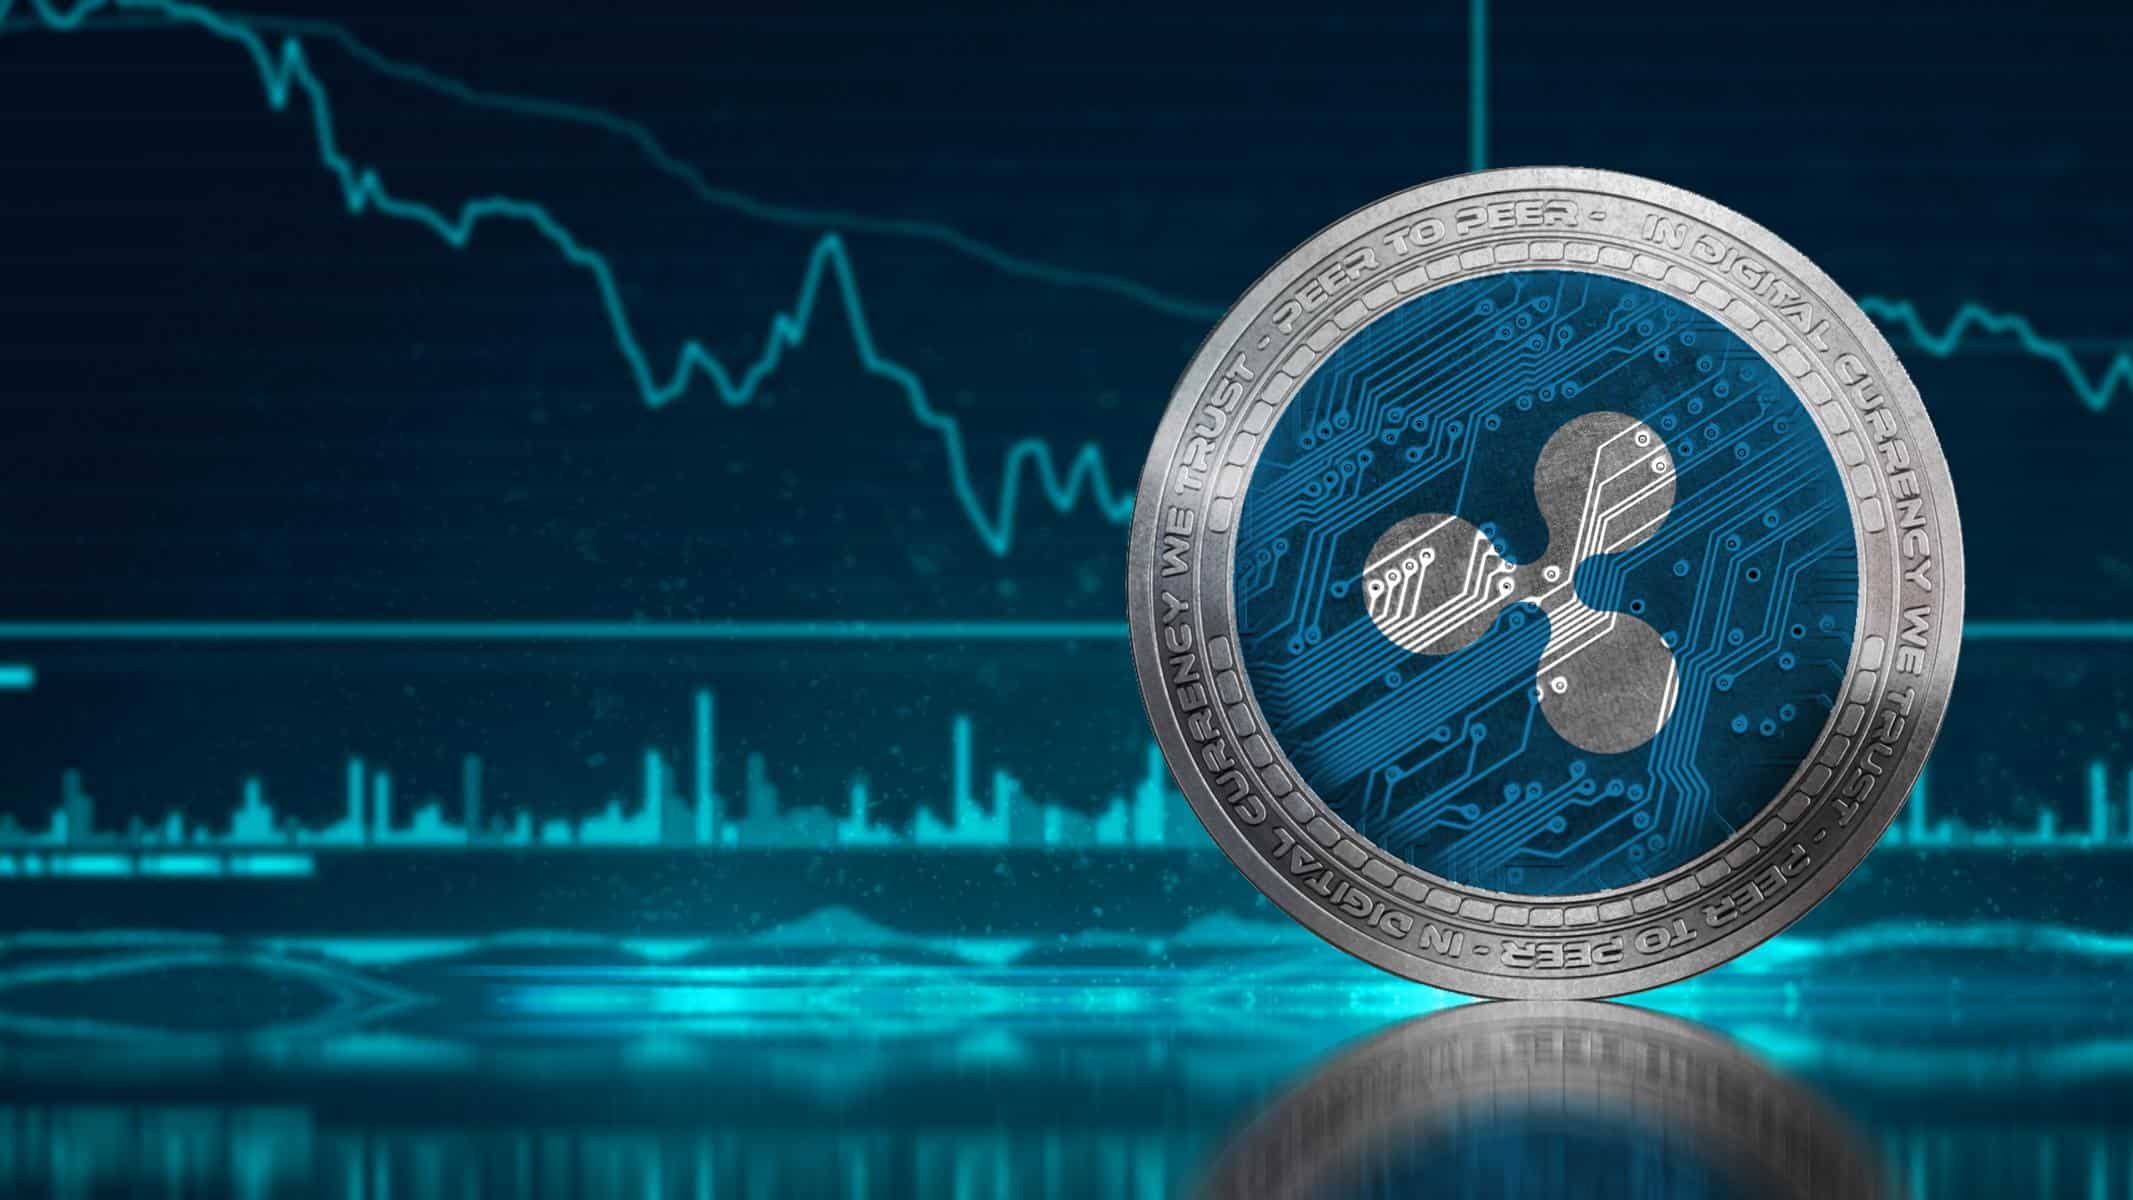 Ripple Price Forecast: Analyst Suggests XRP Bull Run Imminent Amid SEC Lawsuit Developments